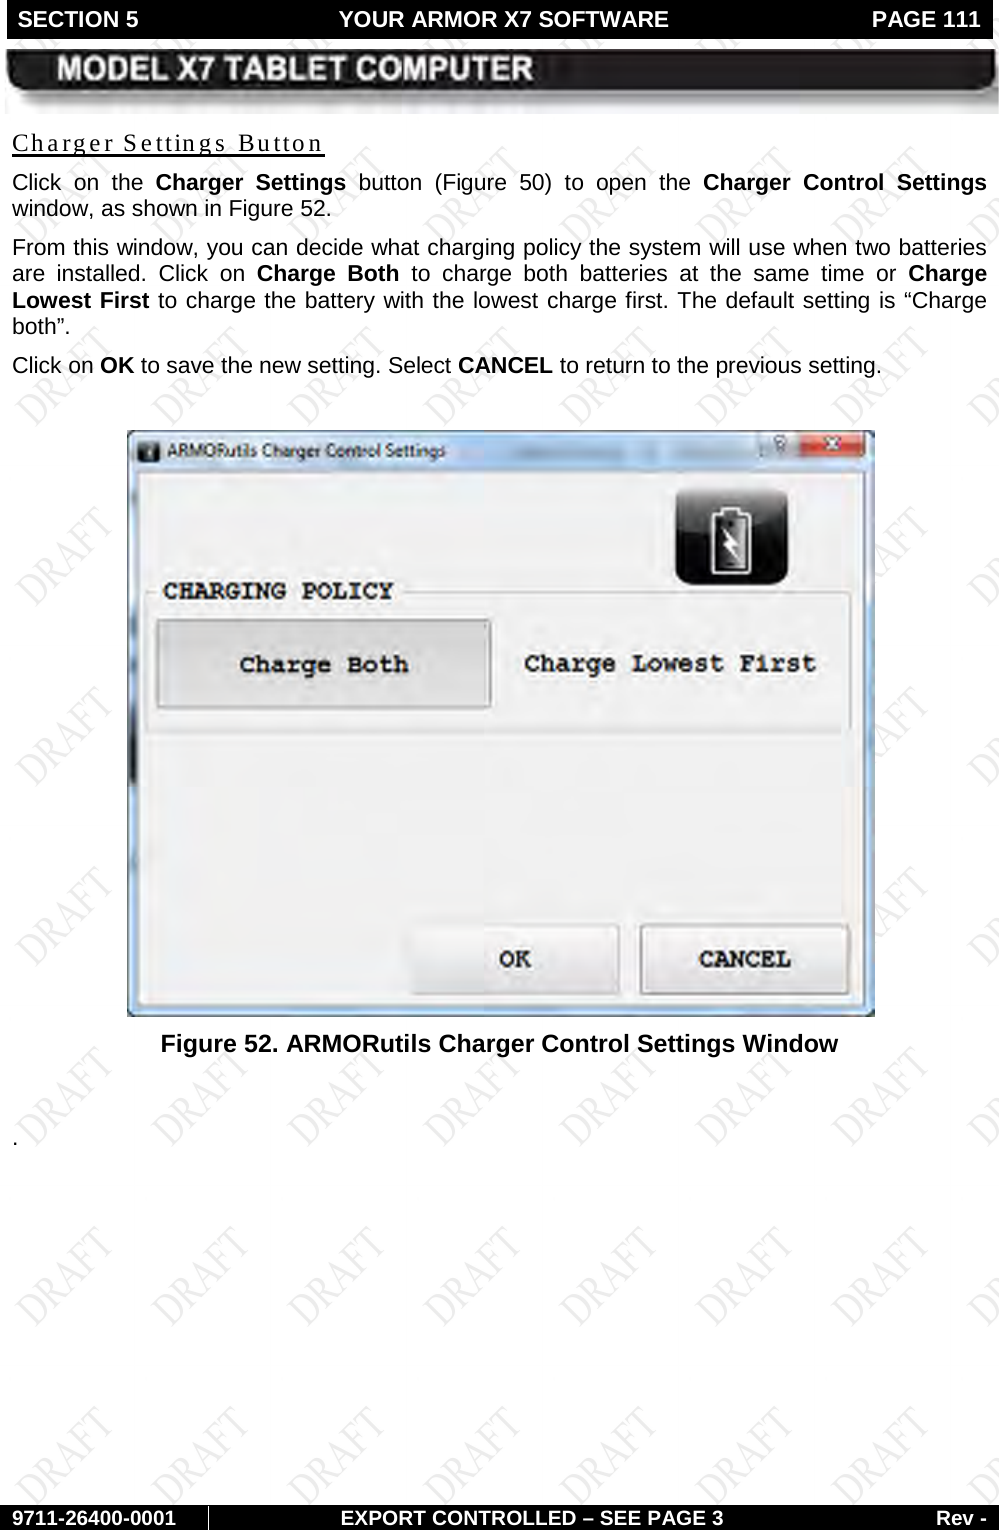 SECTION 5 YOUR ARMOR X7 SOFTWARE  PAGE 111        9711-26400-0001 EXPORT CONTROLLED – SEE PAGE 3 Rev - Click on the Charger Settings button  (Charger Settings Button Figure  50)  to open the Charger Control Settings window, as shown in Figure 52.  From this window, you can decide what charging policy the system will use when two batteries are installed. Click on Charge Both to charge both batteries at the same time or  Charge Lowest First to charge the battery with the lowest charge first. The default setting is “Charge both”.  Click on OK to save the new setting. Select CANCEL to return to the previous setting.   Figure 52. ARMORutils Charger Control Settings Window  .   